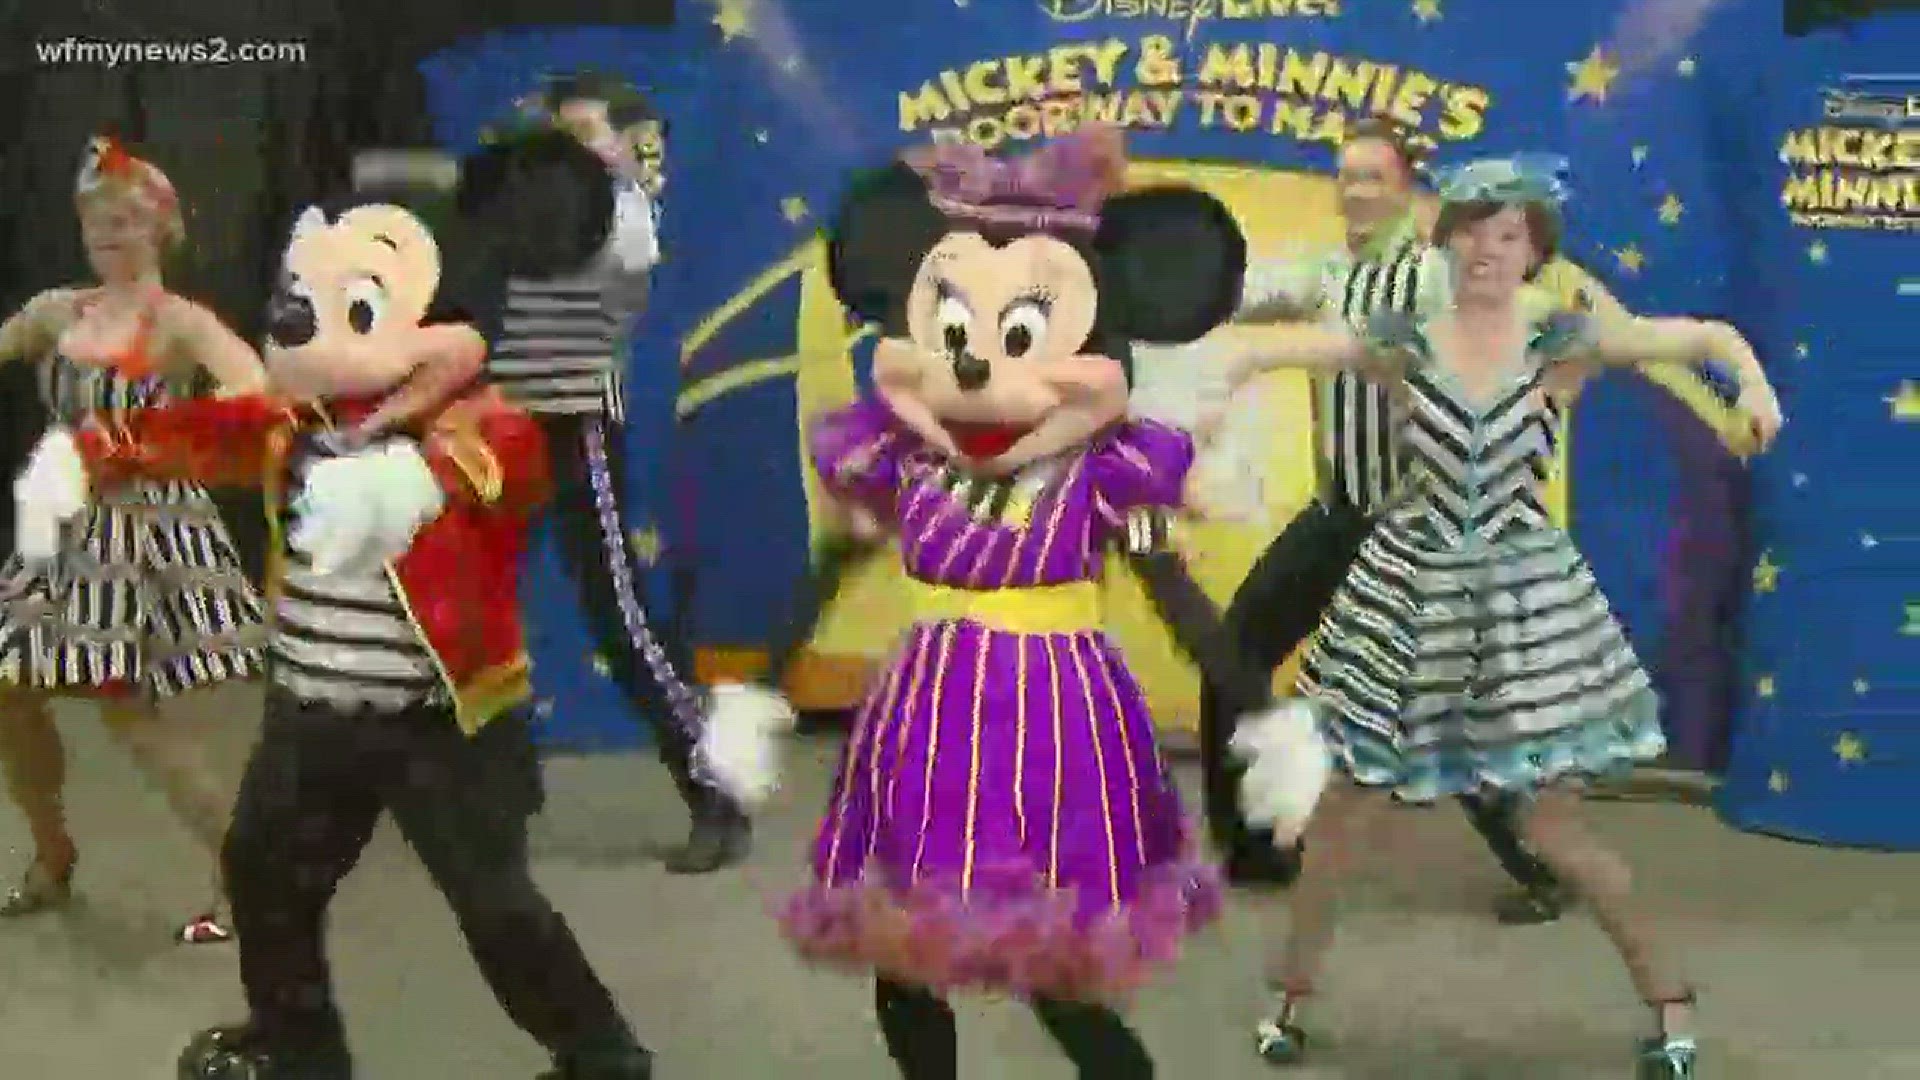 Disney Live! Brings Mickey and Minnie Mouse To The Triad